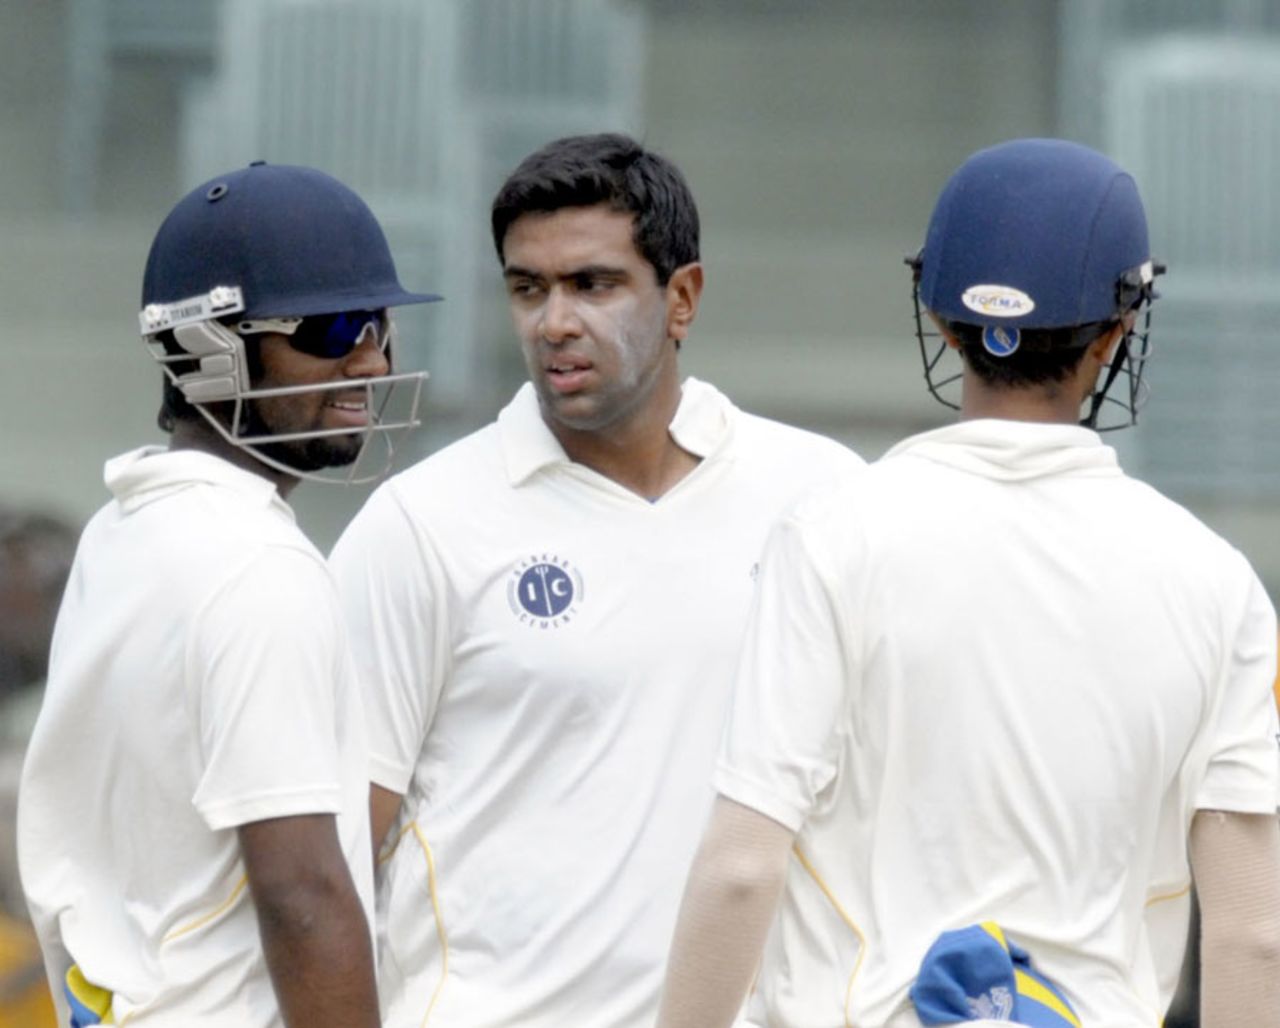 R Ashwin took five wickets to help bowl Gujarat out for 173 in their first innings, Tamil Nadu v Gujarat, Ranji Trophy Super League 2010-11, Chennai, December 16